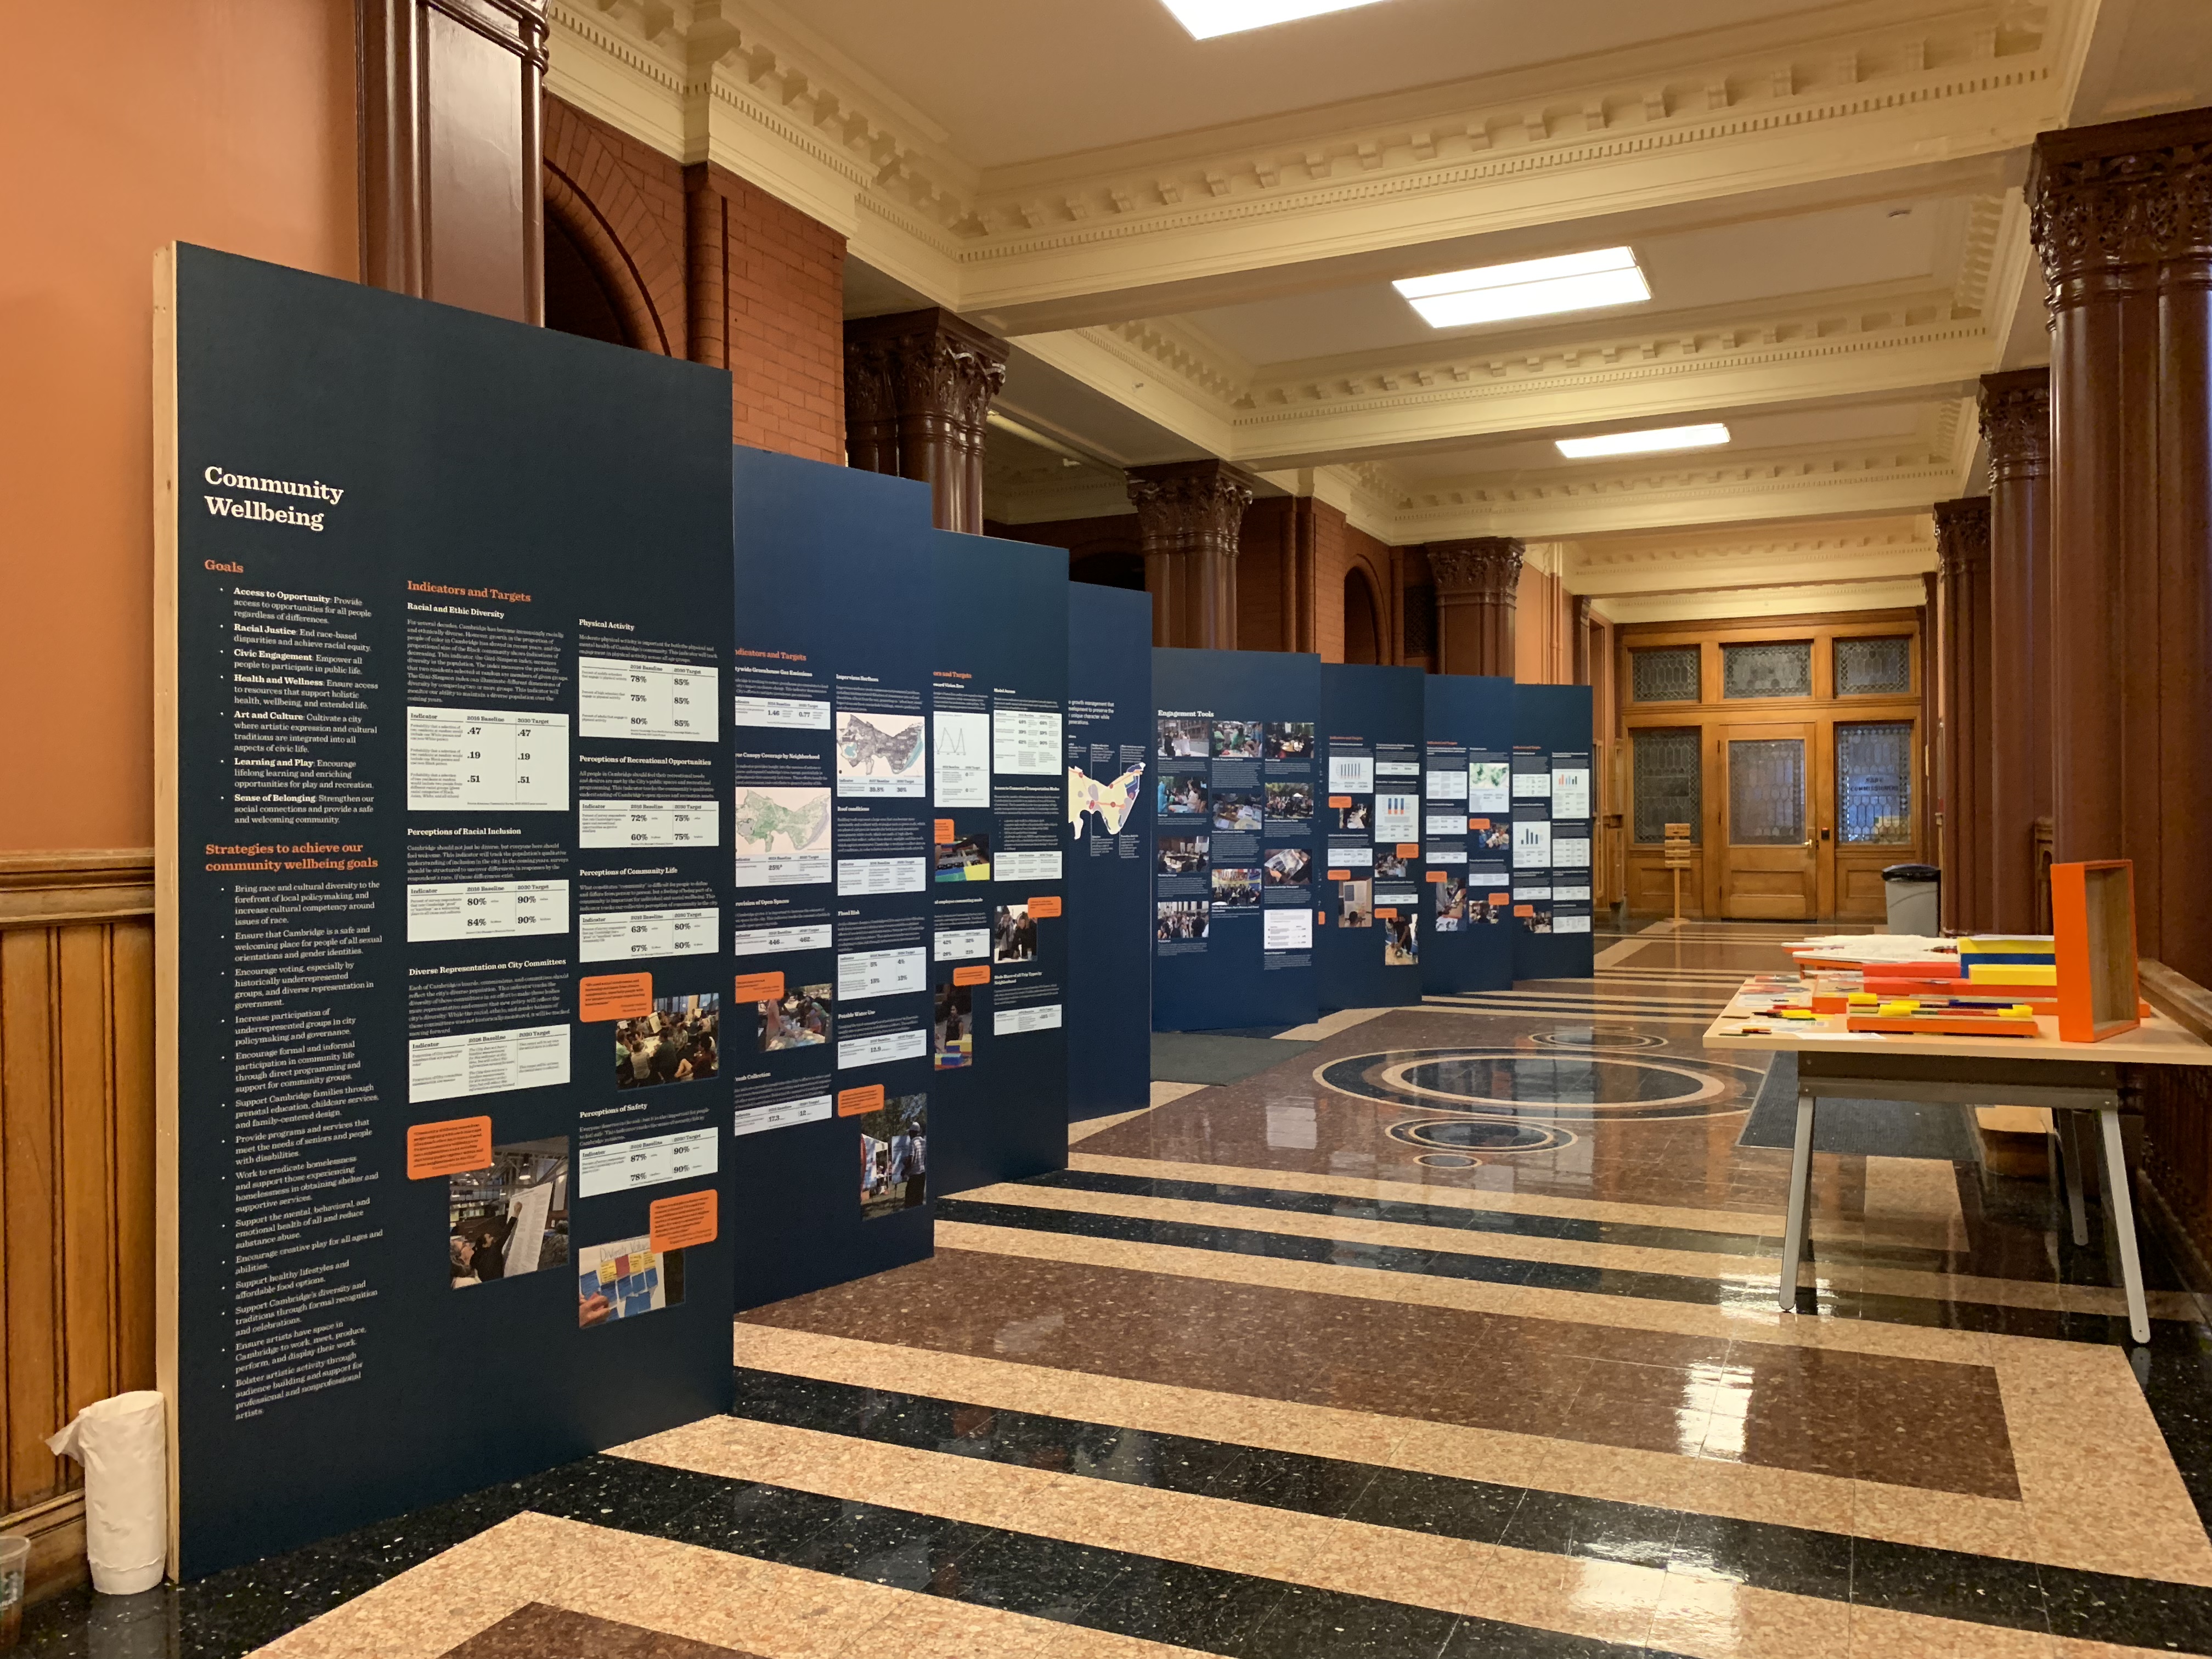 Stop by the Envision Cambridge exhibition at Cambridge City Hall!